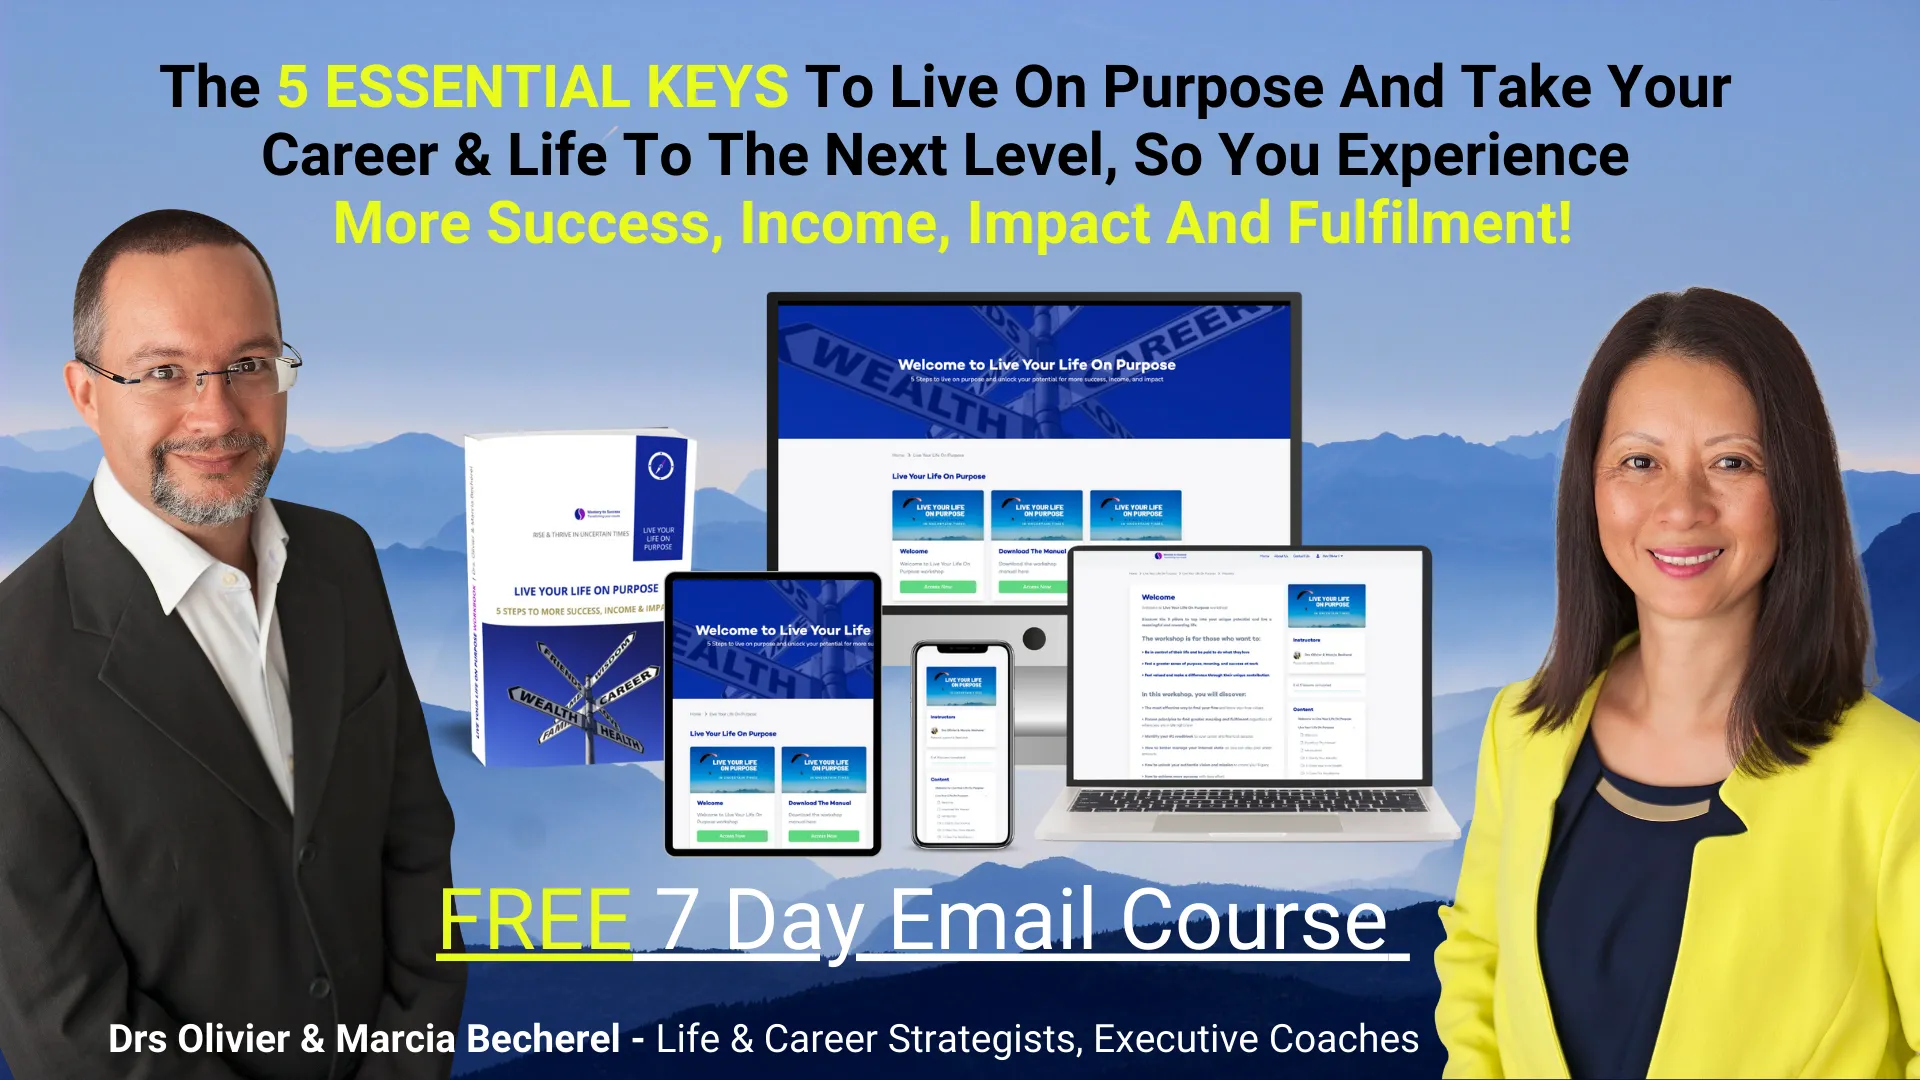 Live Your Life On Purpose FREE 7 Day Email Course